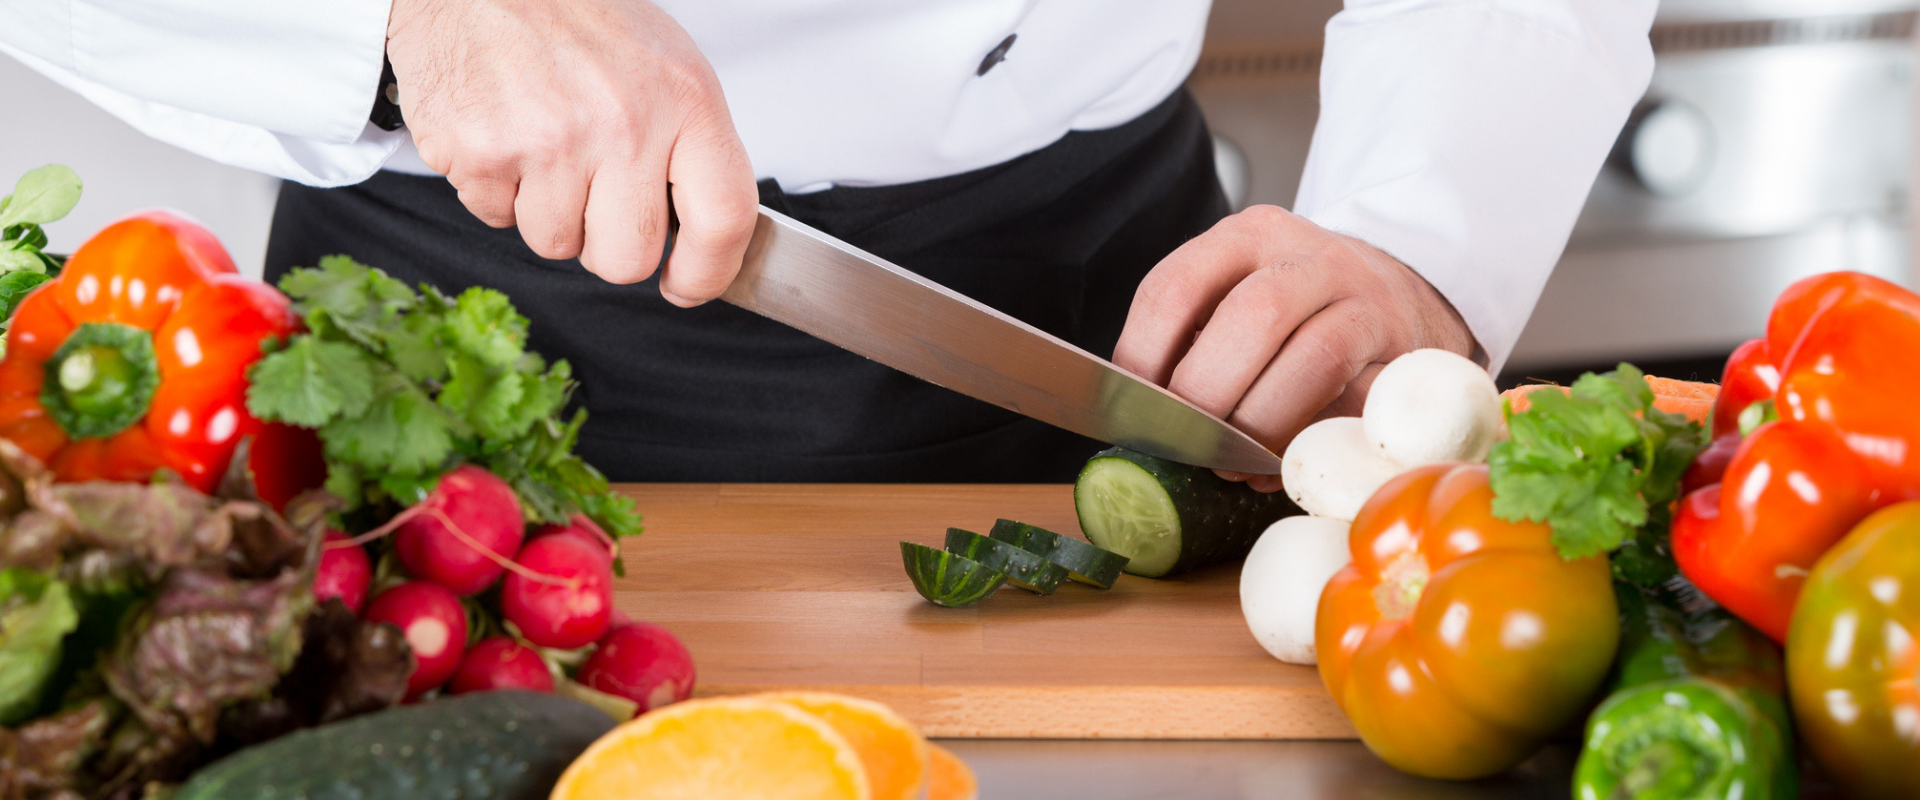 person chopping vegetables